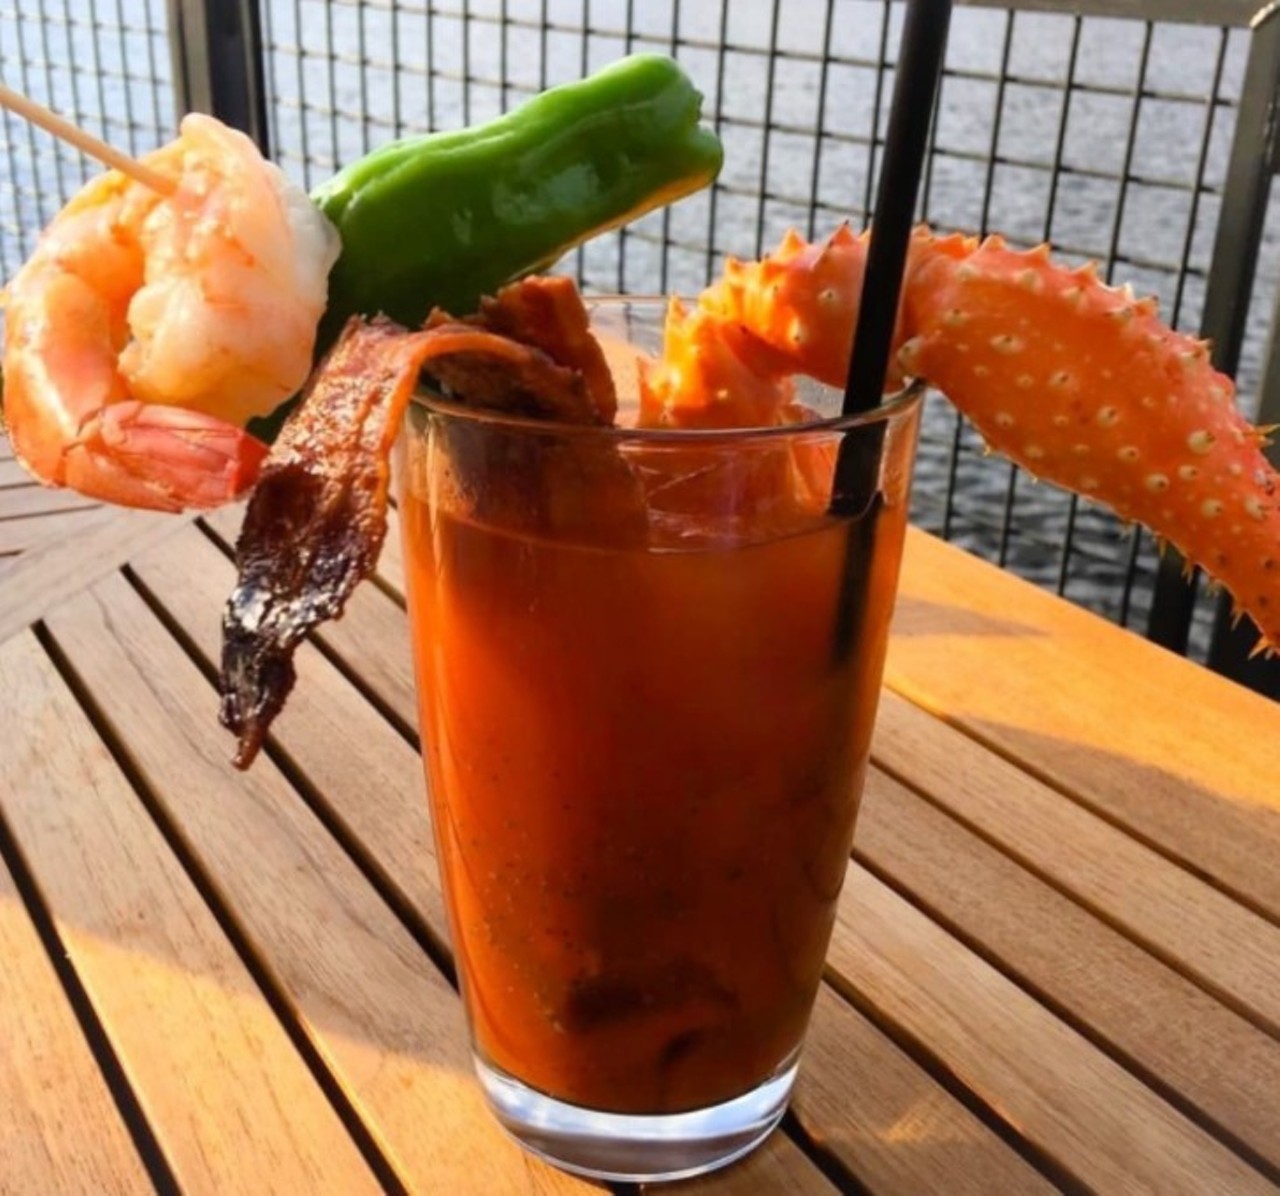 Paddlefish
What to drink: Bloody Mary, just look at it. 
Photo via paddlefishorl/Instagram